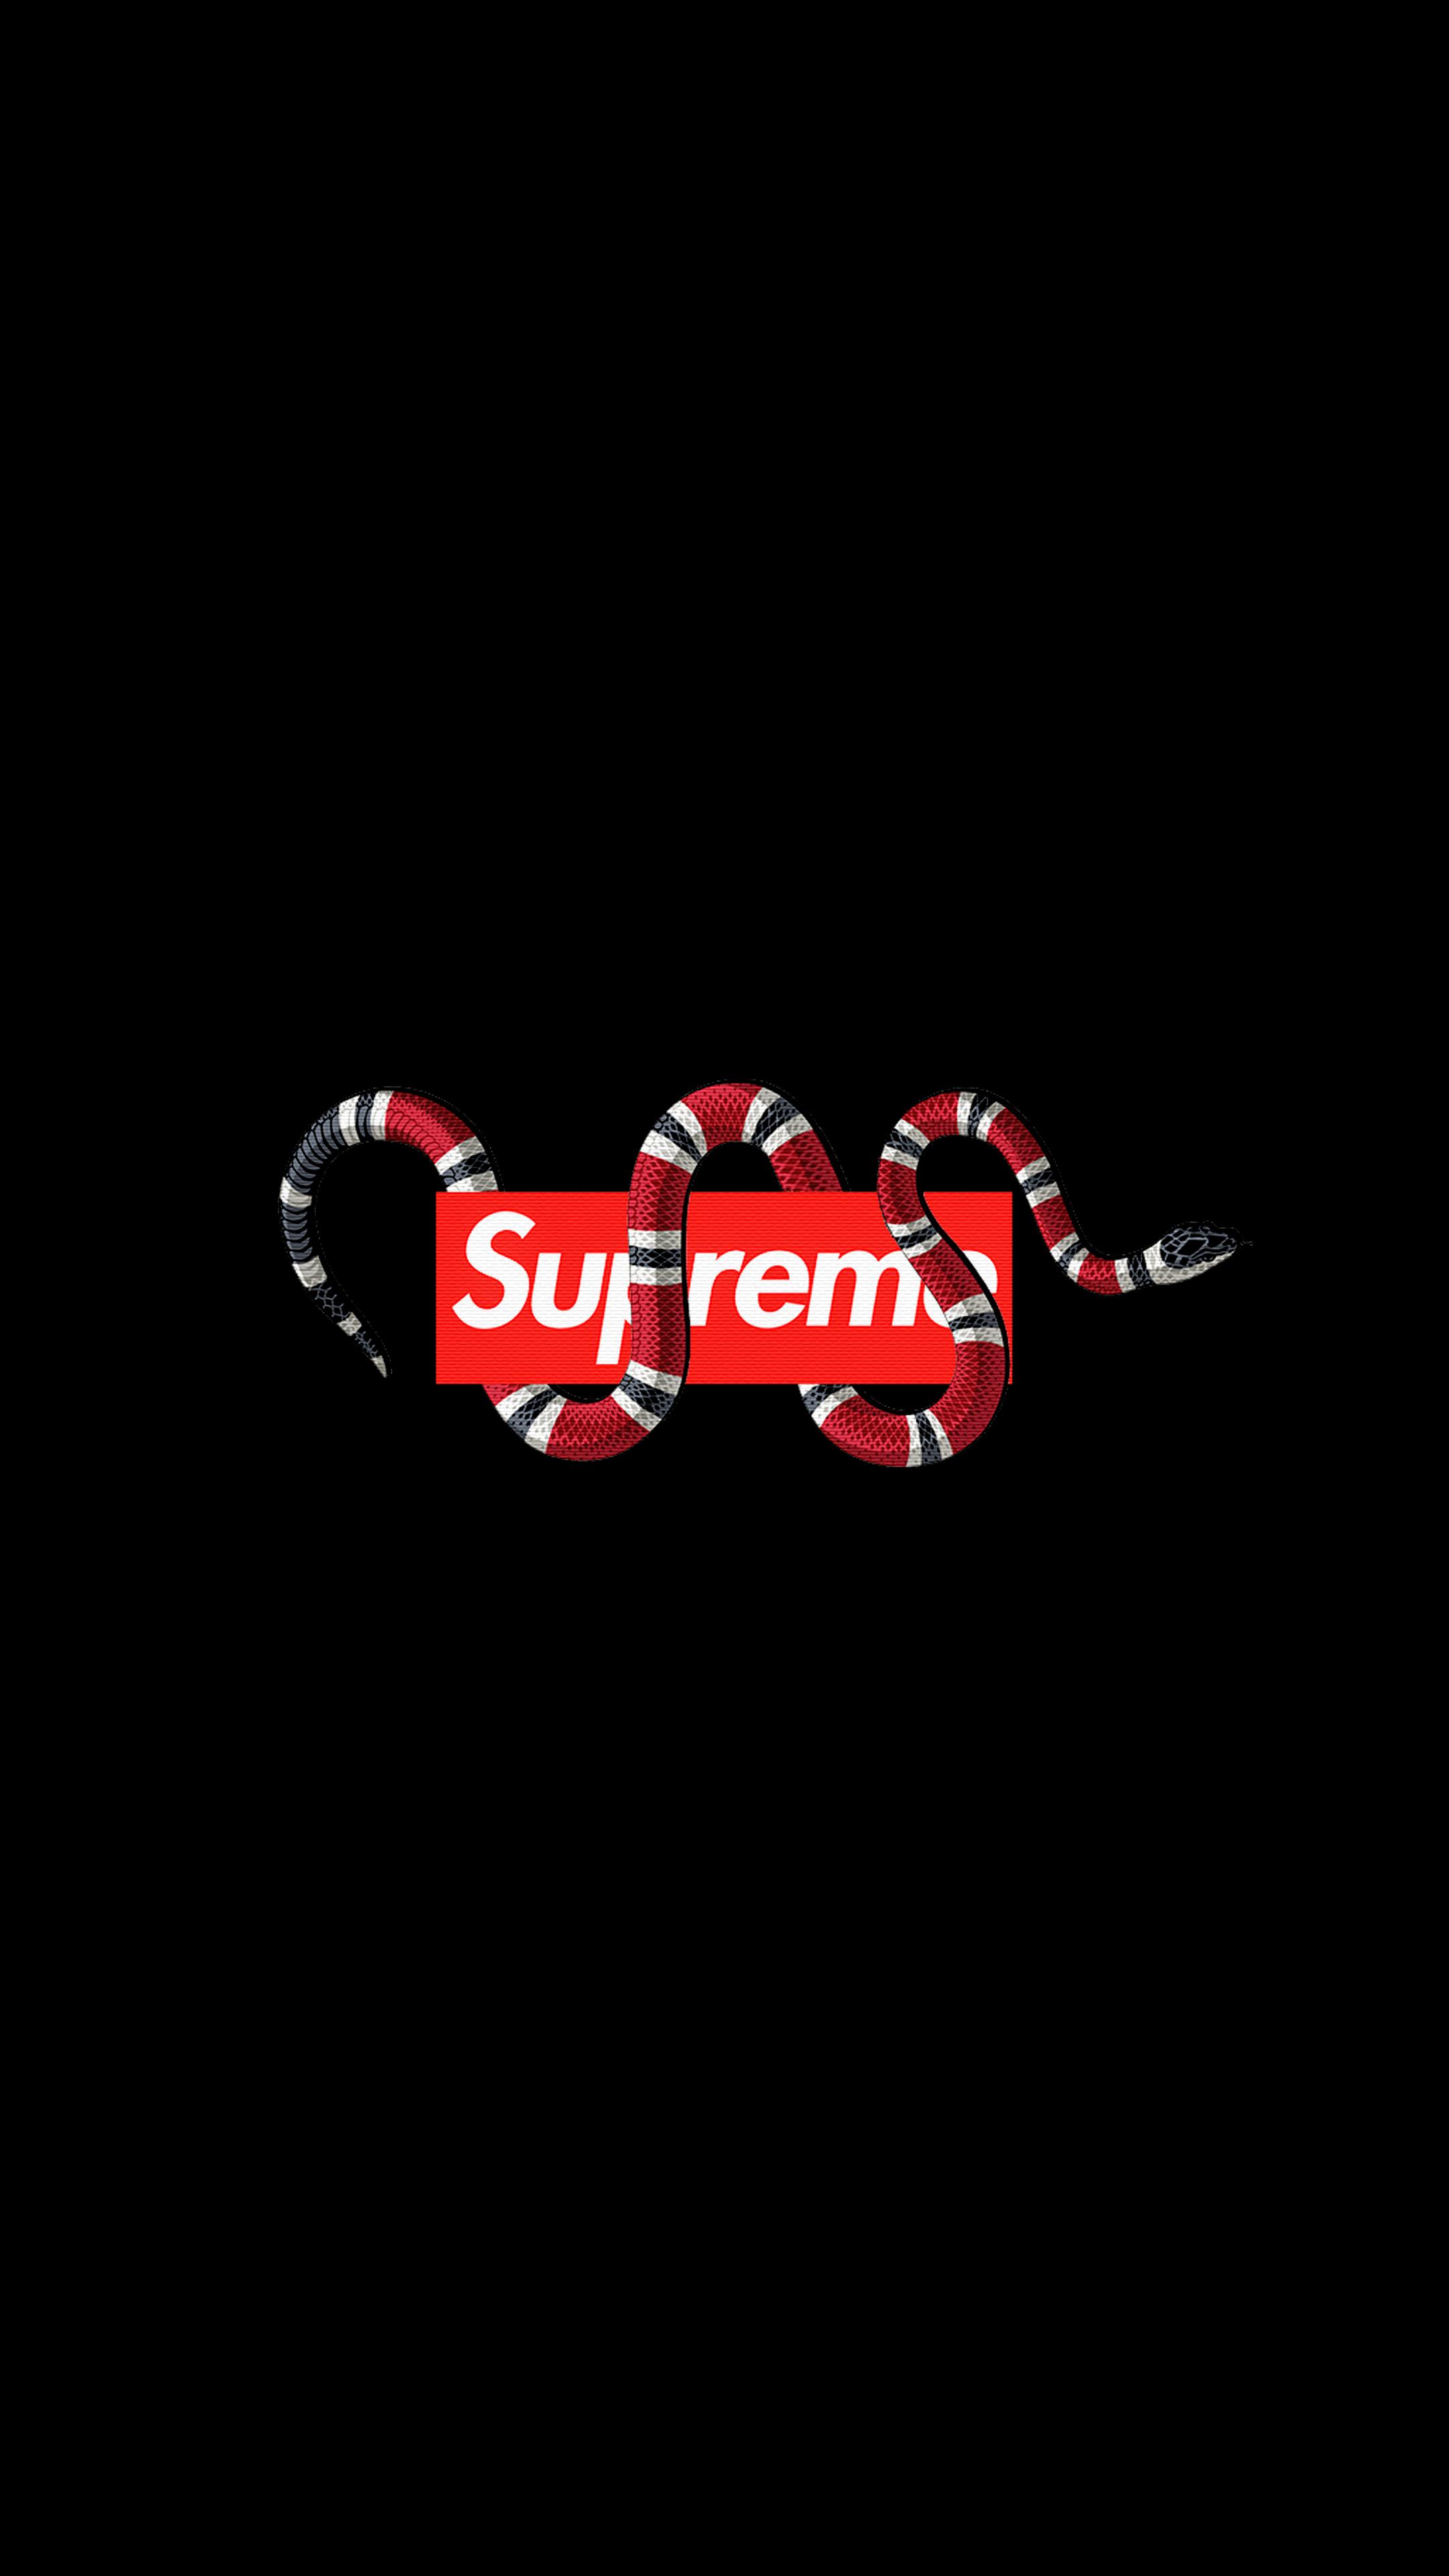 Supreme Logo Wallpapers - Top 26 Best Supreme Logo Wallpapers [ HQ ]